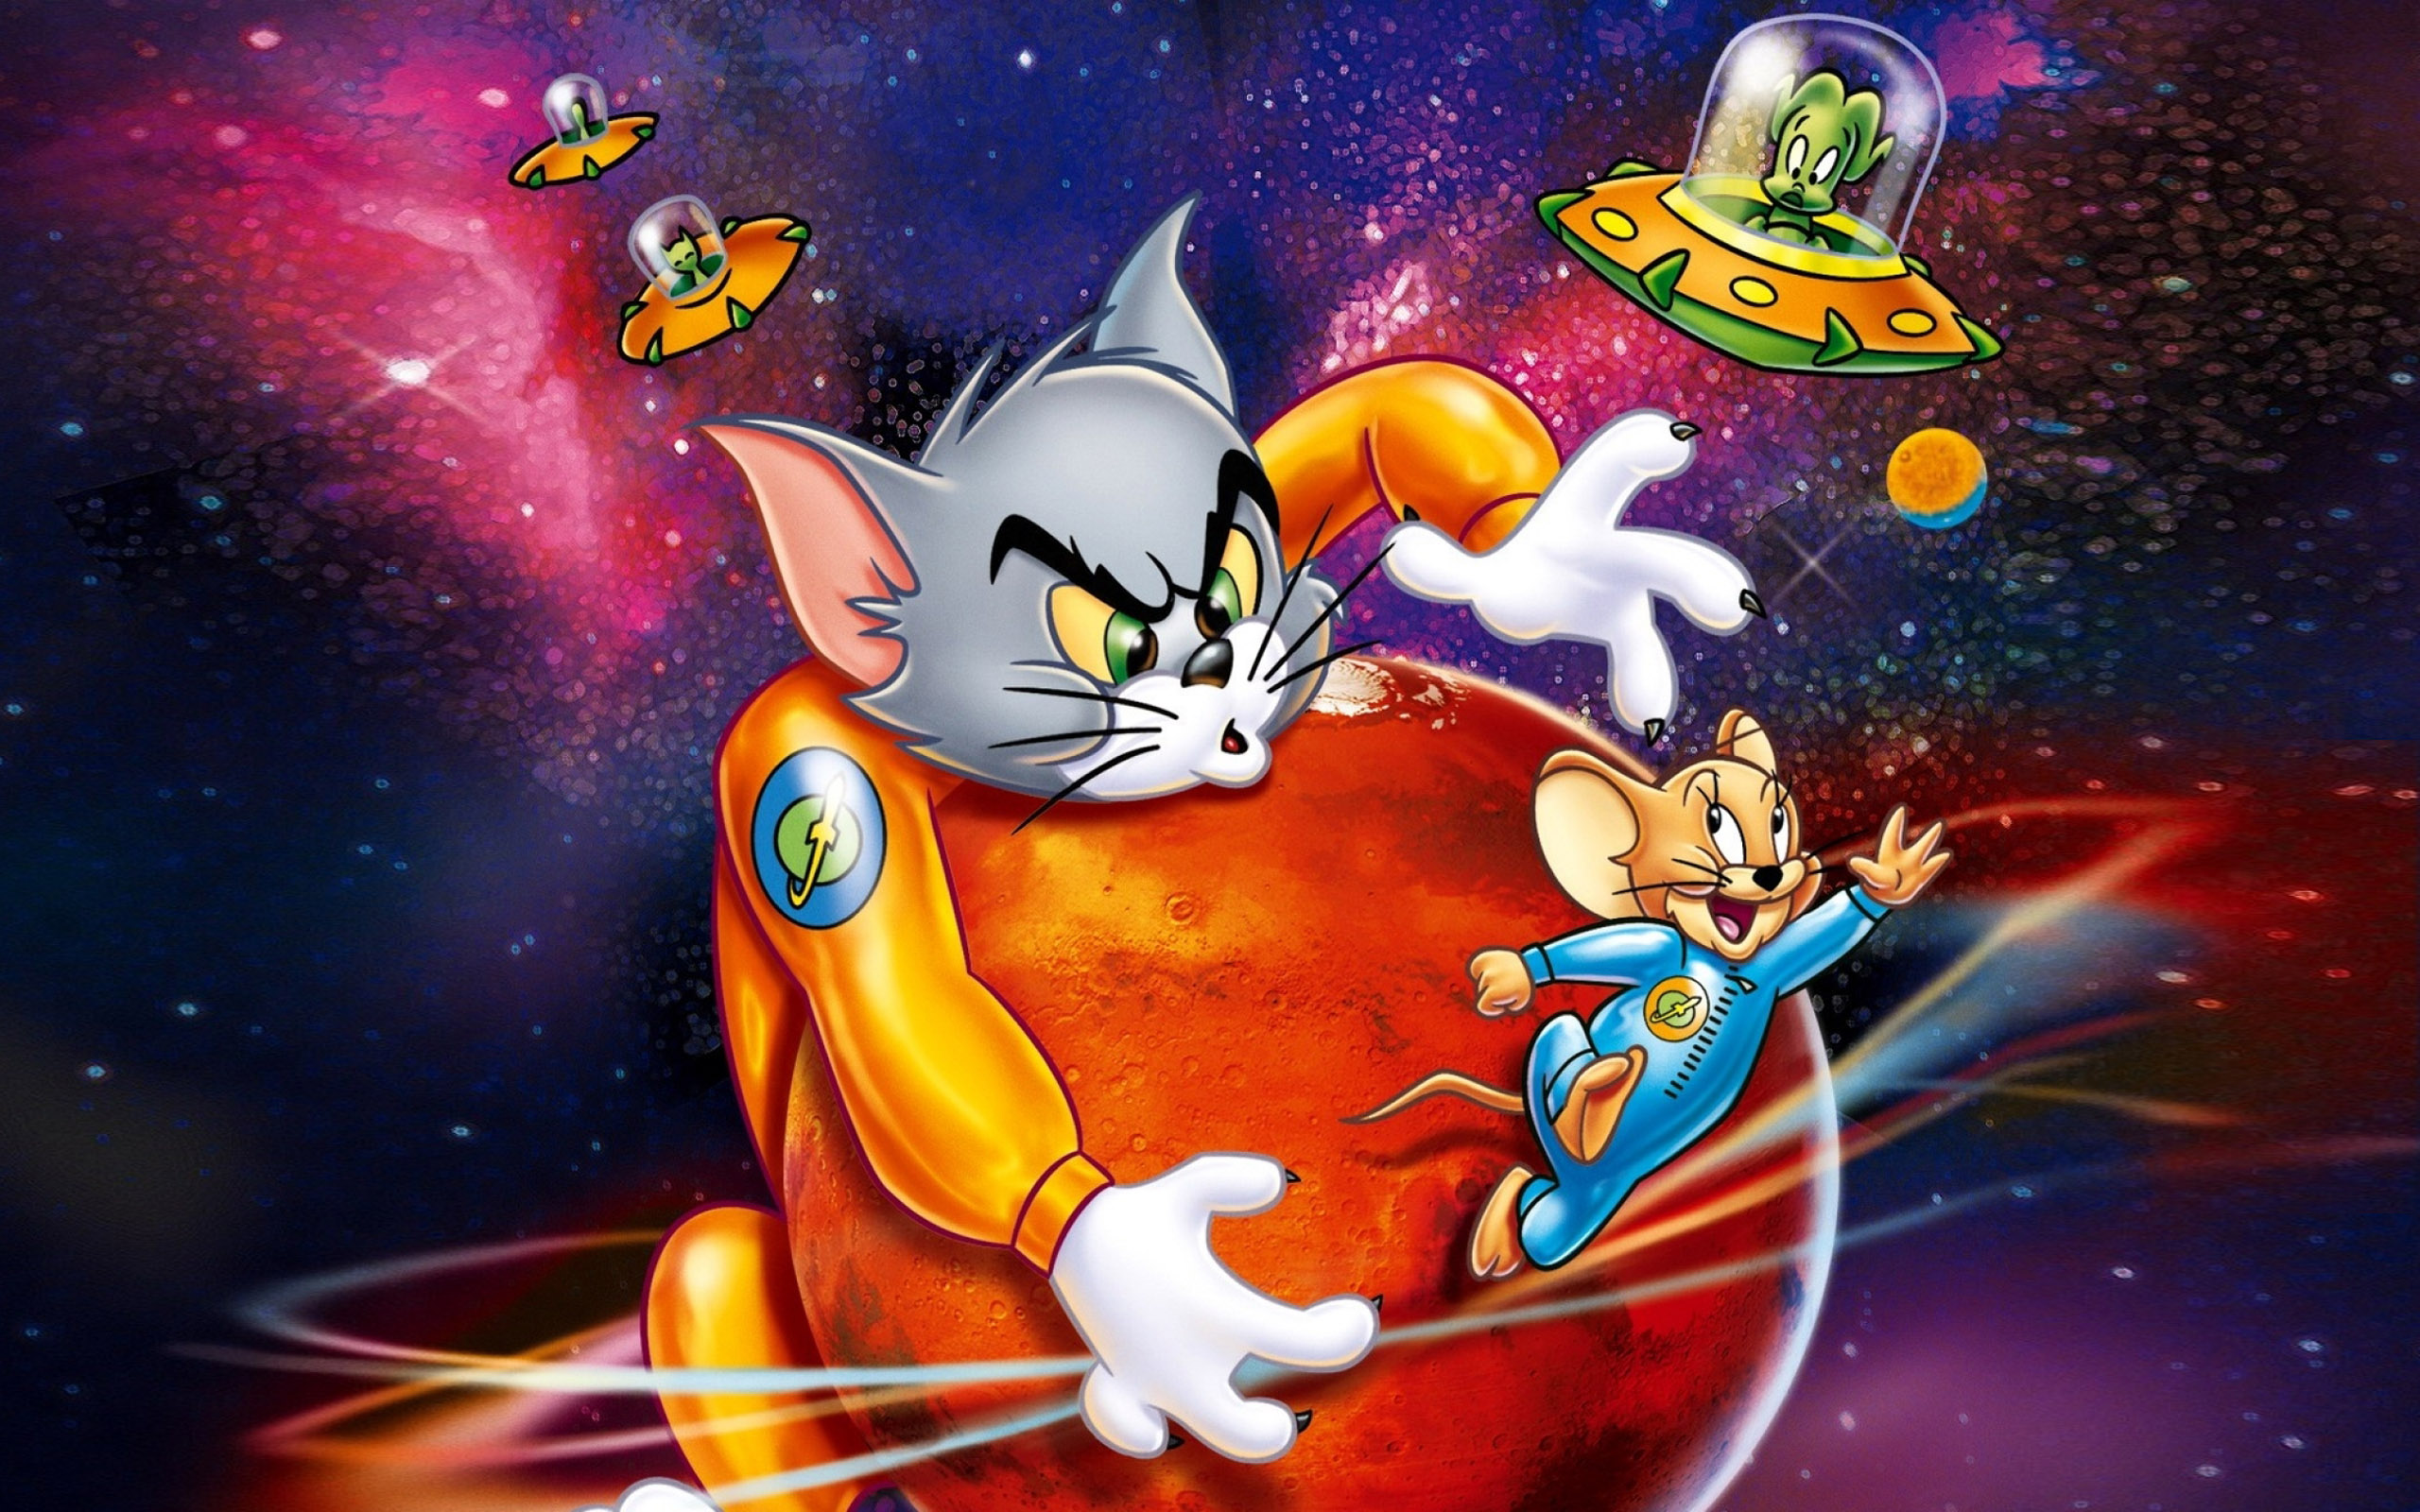 tom and jerry blast off to mars poster